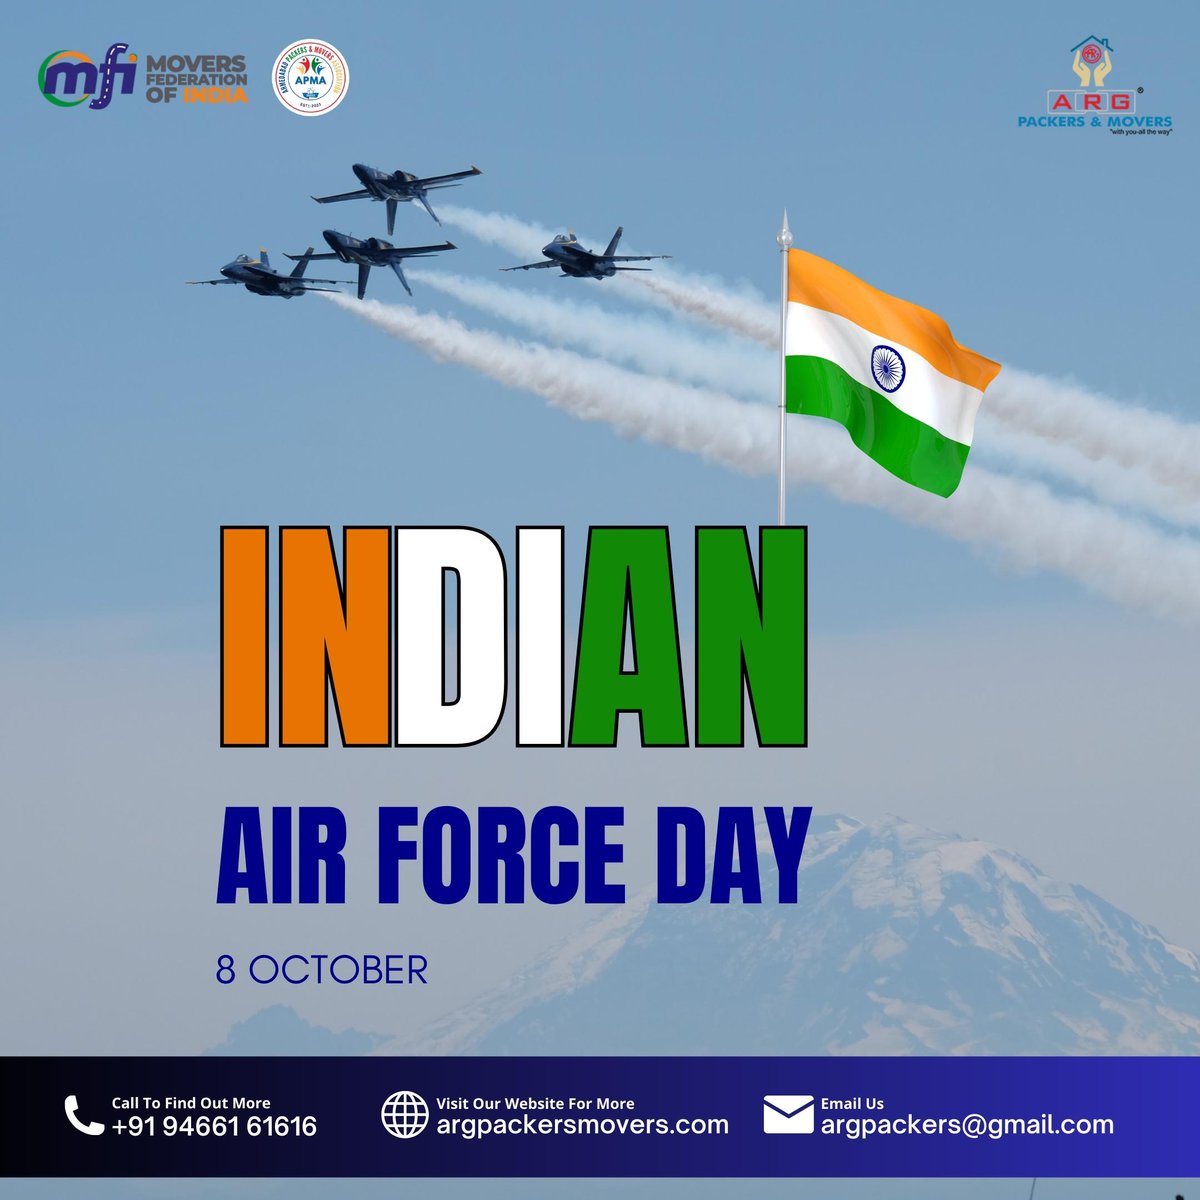 Saluting the Indian Air Force on this special day! Arg Packers and Movers stand with pride and gratitude for their unmatched valor and dedication.✈️

#IndianAirForceDay #SaluteToHeroes #MoveWithAssurance #CarTransport #VehicleRelocation #ARGPackers #SafeMoving #ReliableService